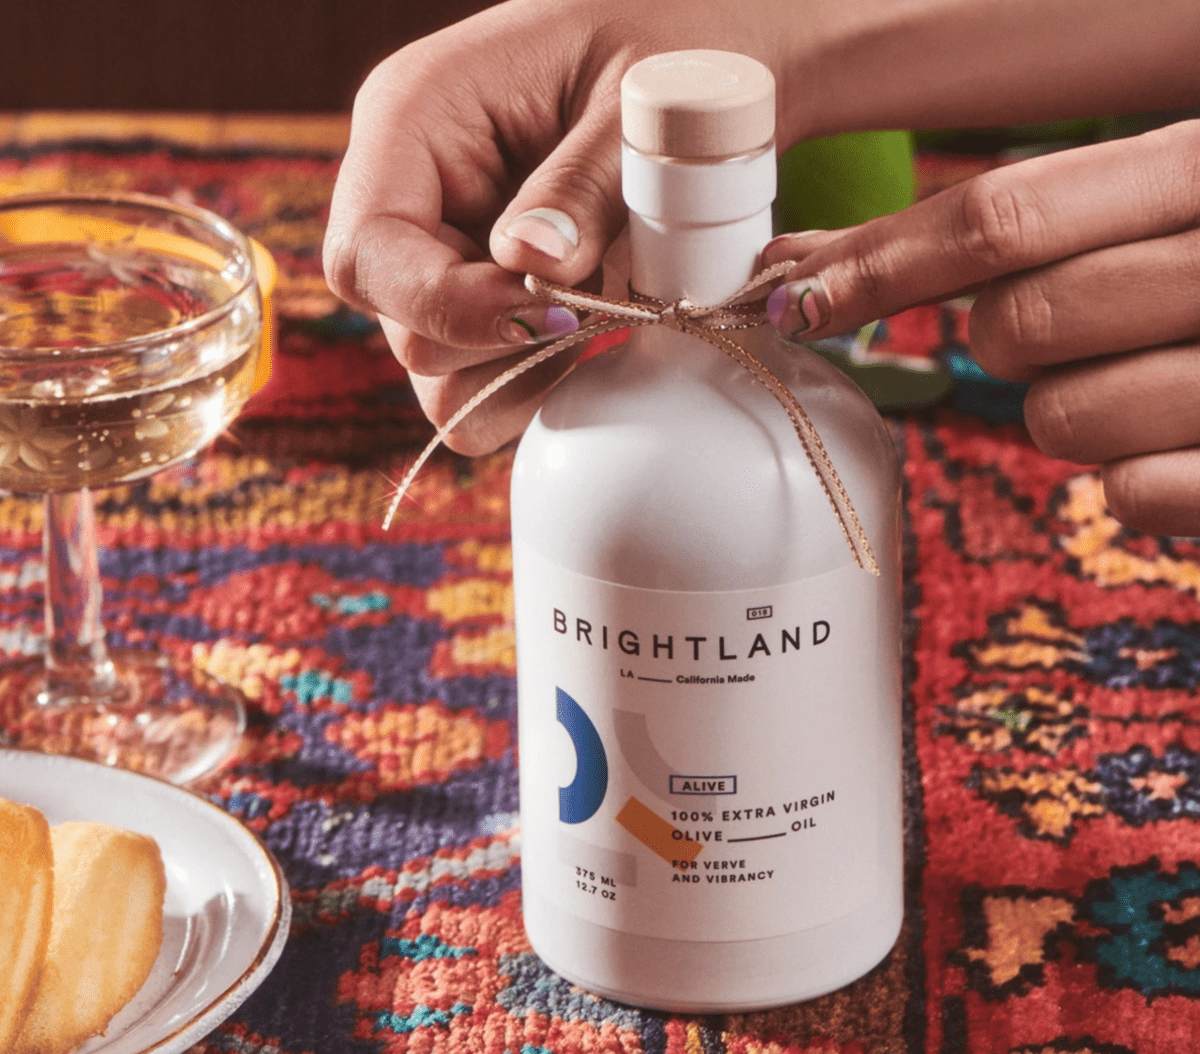 Brightland.co Olive Oil Gifts for Chefs